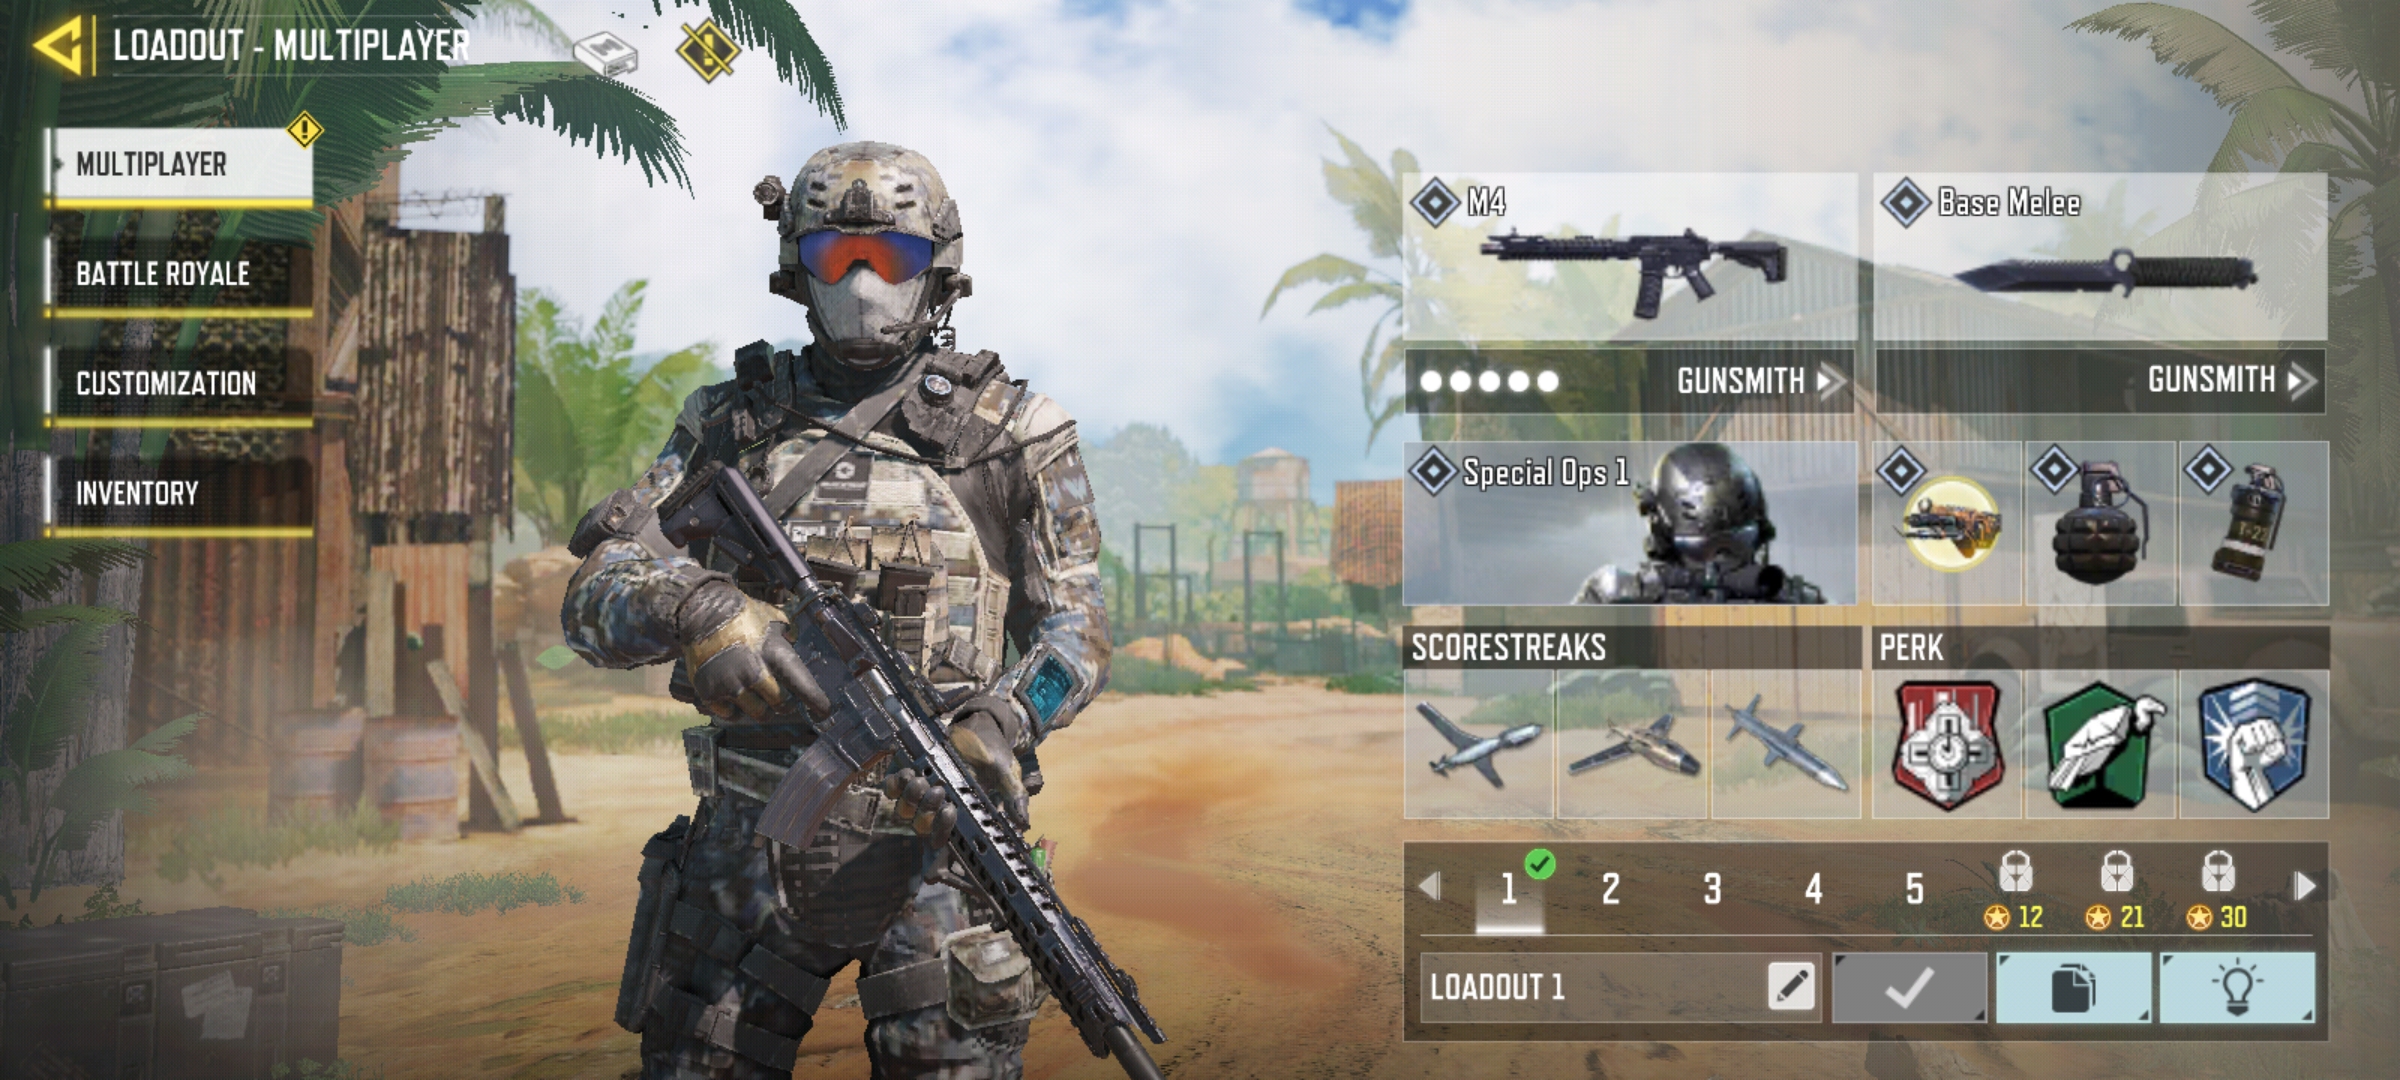 Loadout Call of Duty Mobile